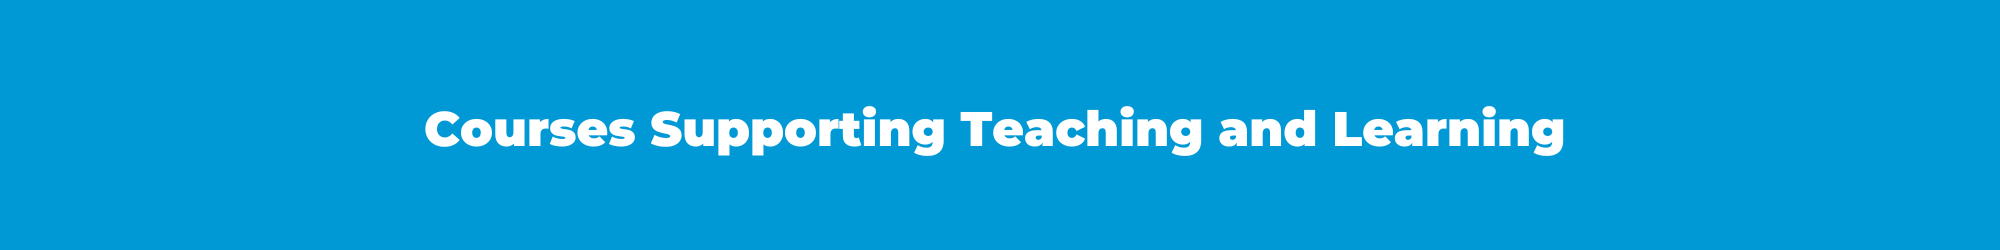 Courses supporting Teaching and Learning